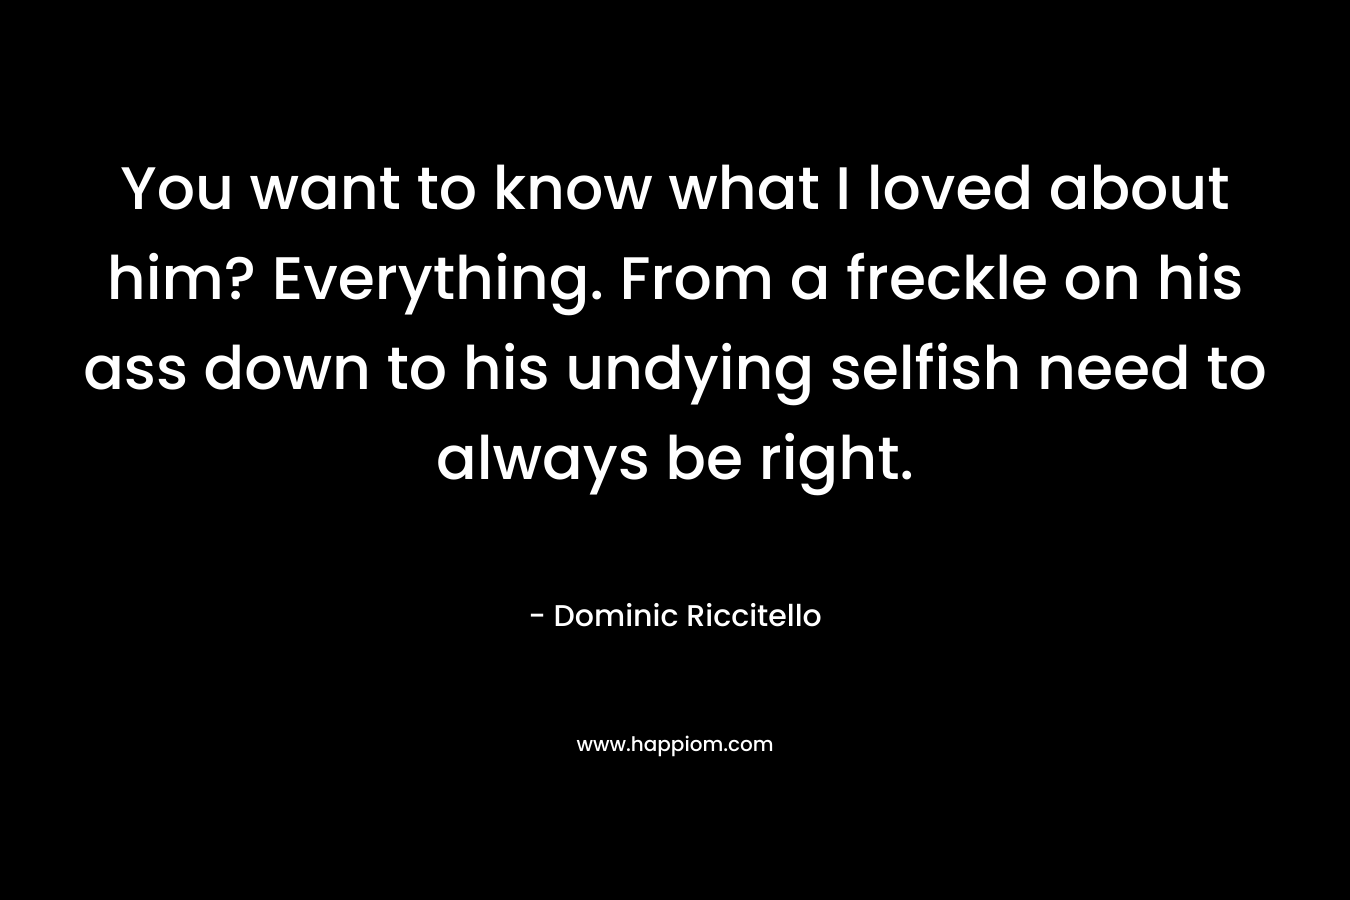 You want to know what I loved about him? Everything. From a freckle on his ass down to his undying selfish need to always be right. – Dominic Riccitello